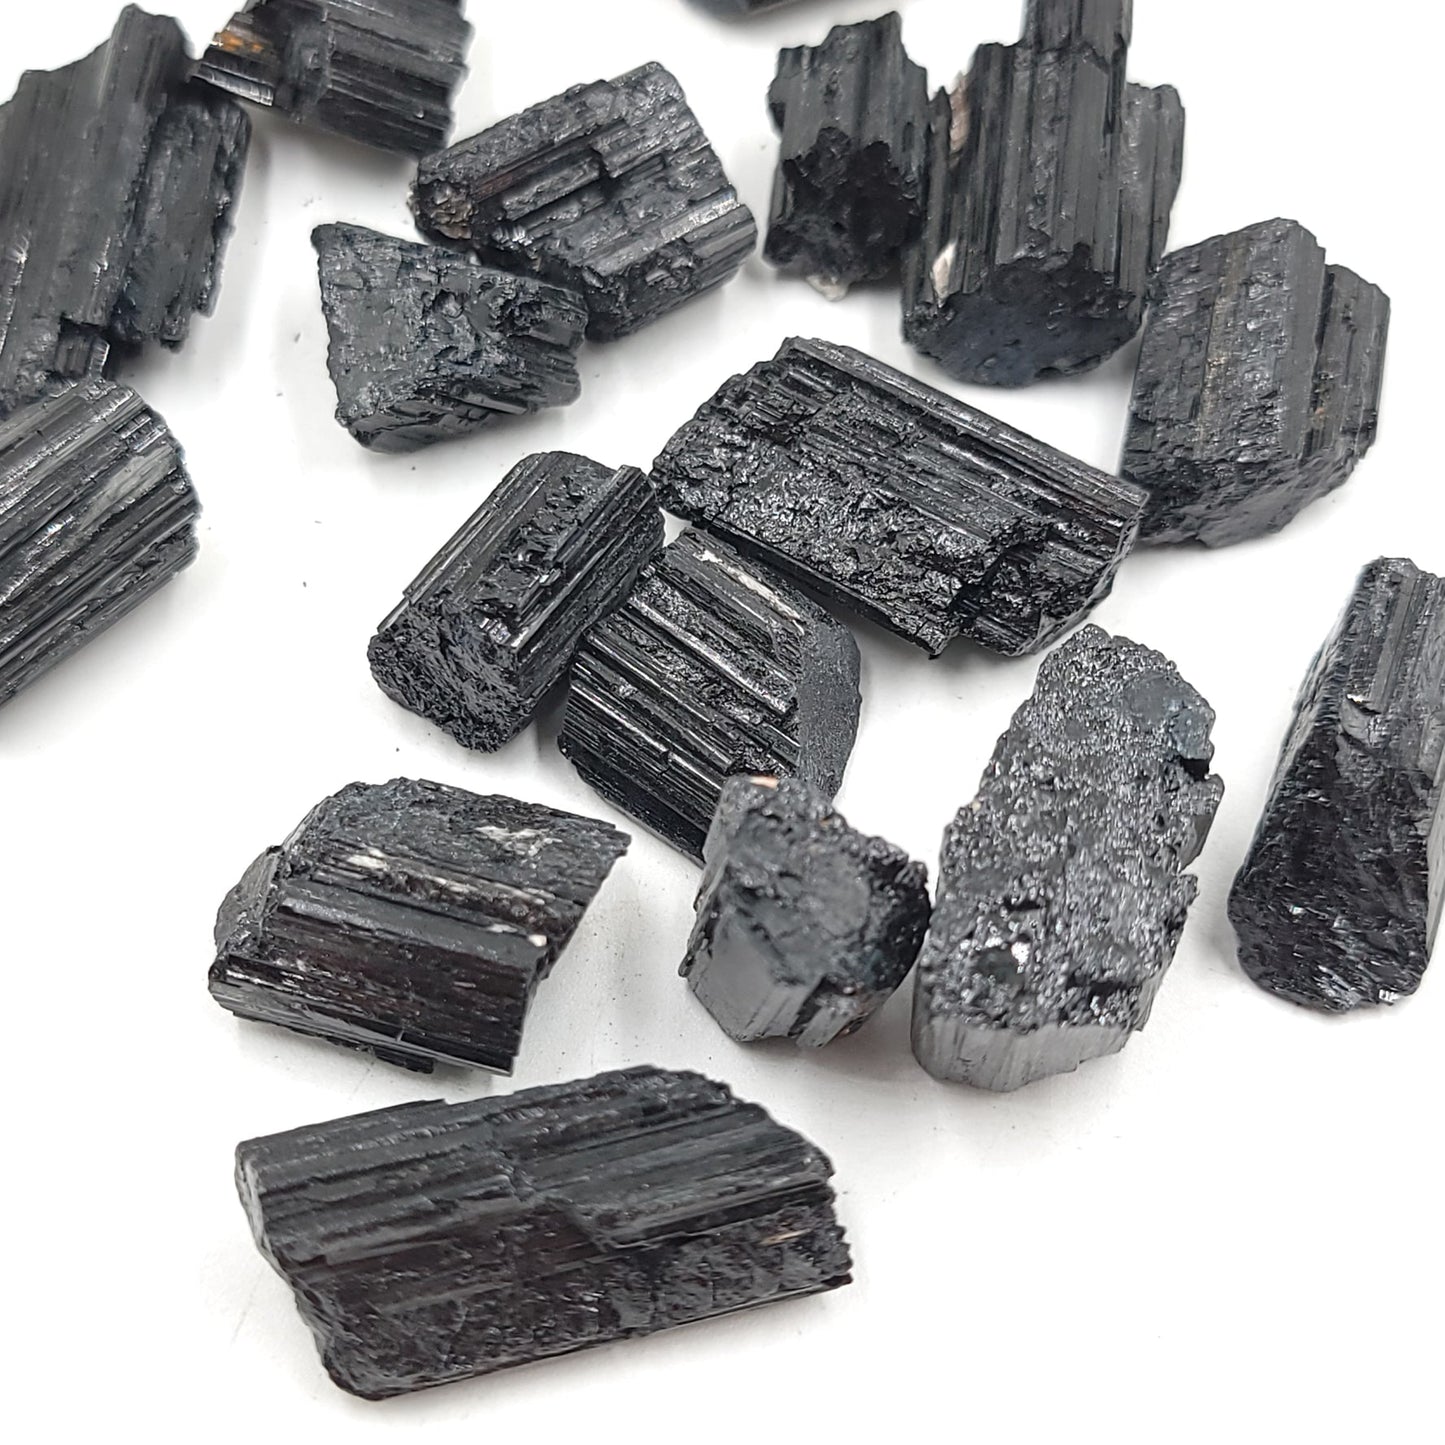 Black Tourmaline Rough Stone High Quality "Small" - Elevated Metaphysical